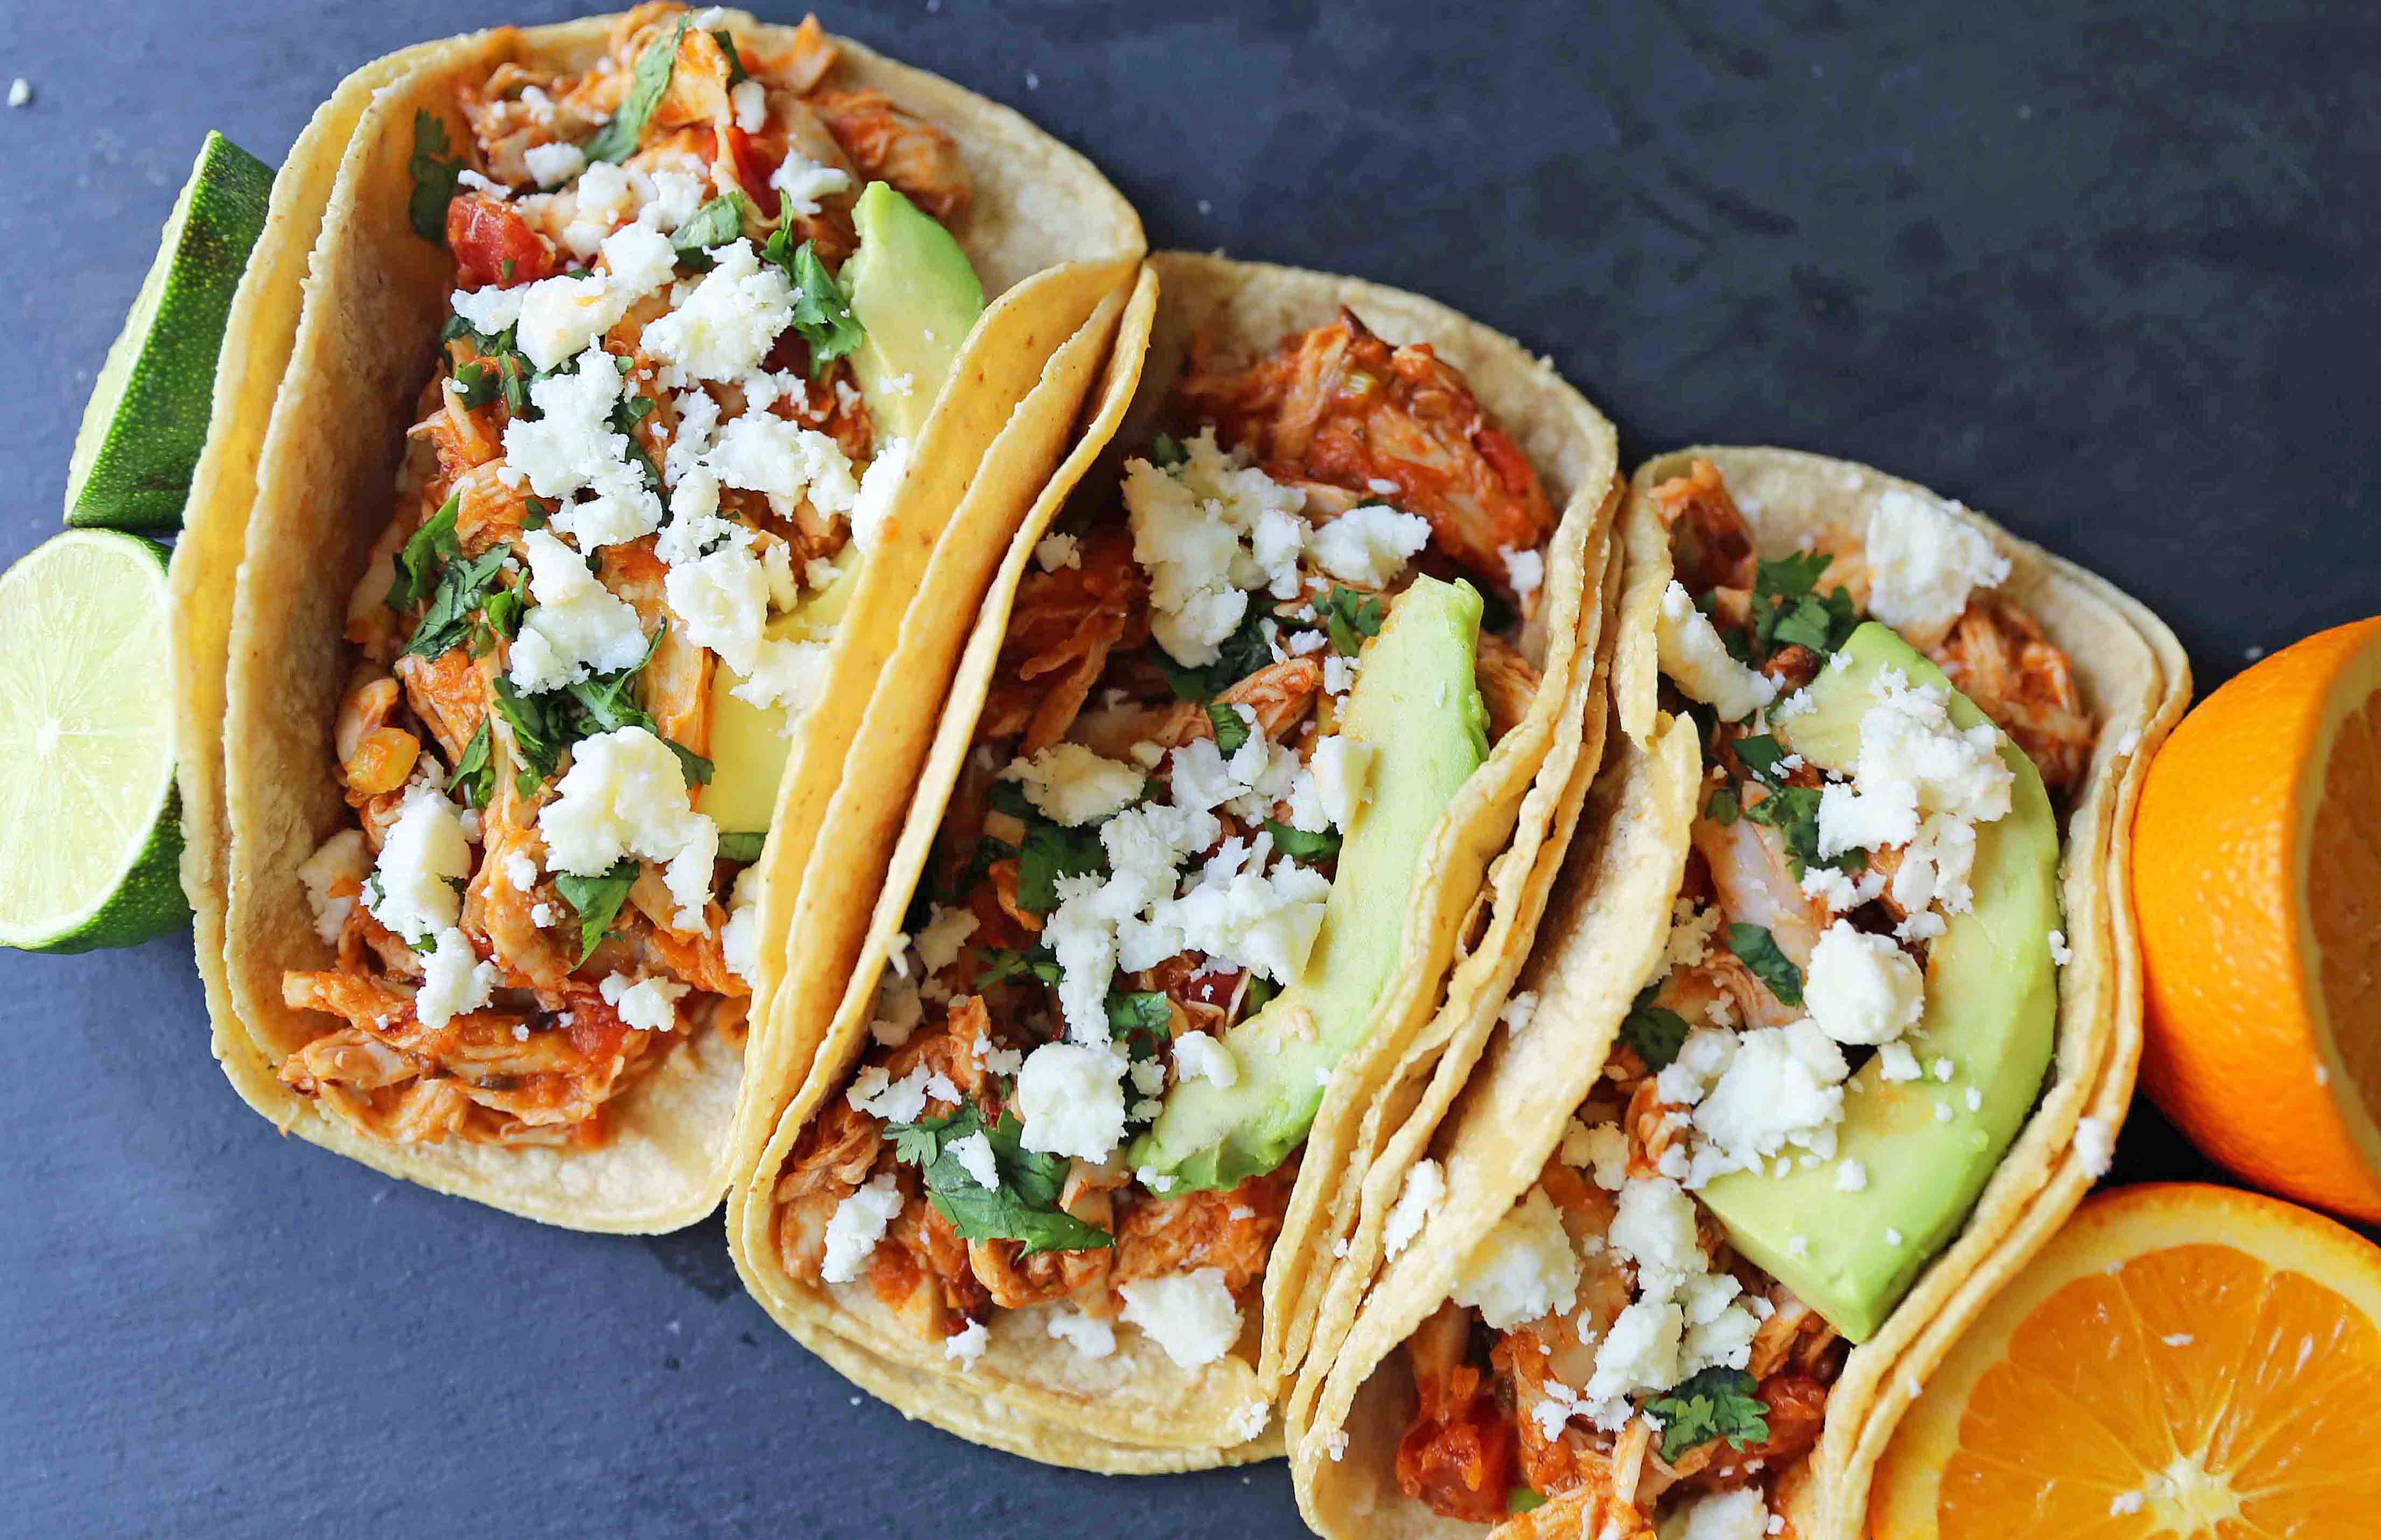 Chipotle Chicken Tinga Tacos. A simple, quick, and easy chicken taco recipe. One skillet chicken taco recipe. www.modernhoney.com #chickentinga #chipotlechicken #chickentacos #chickentingatacos 